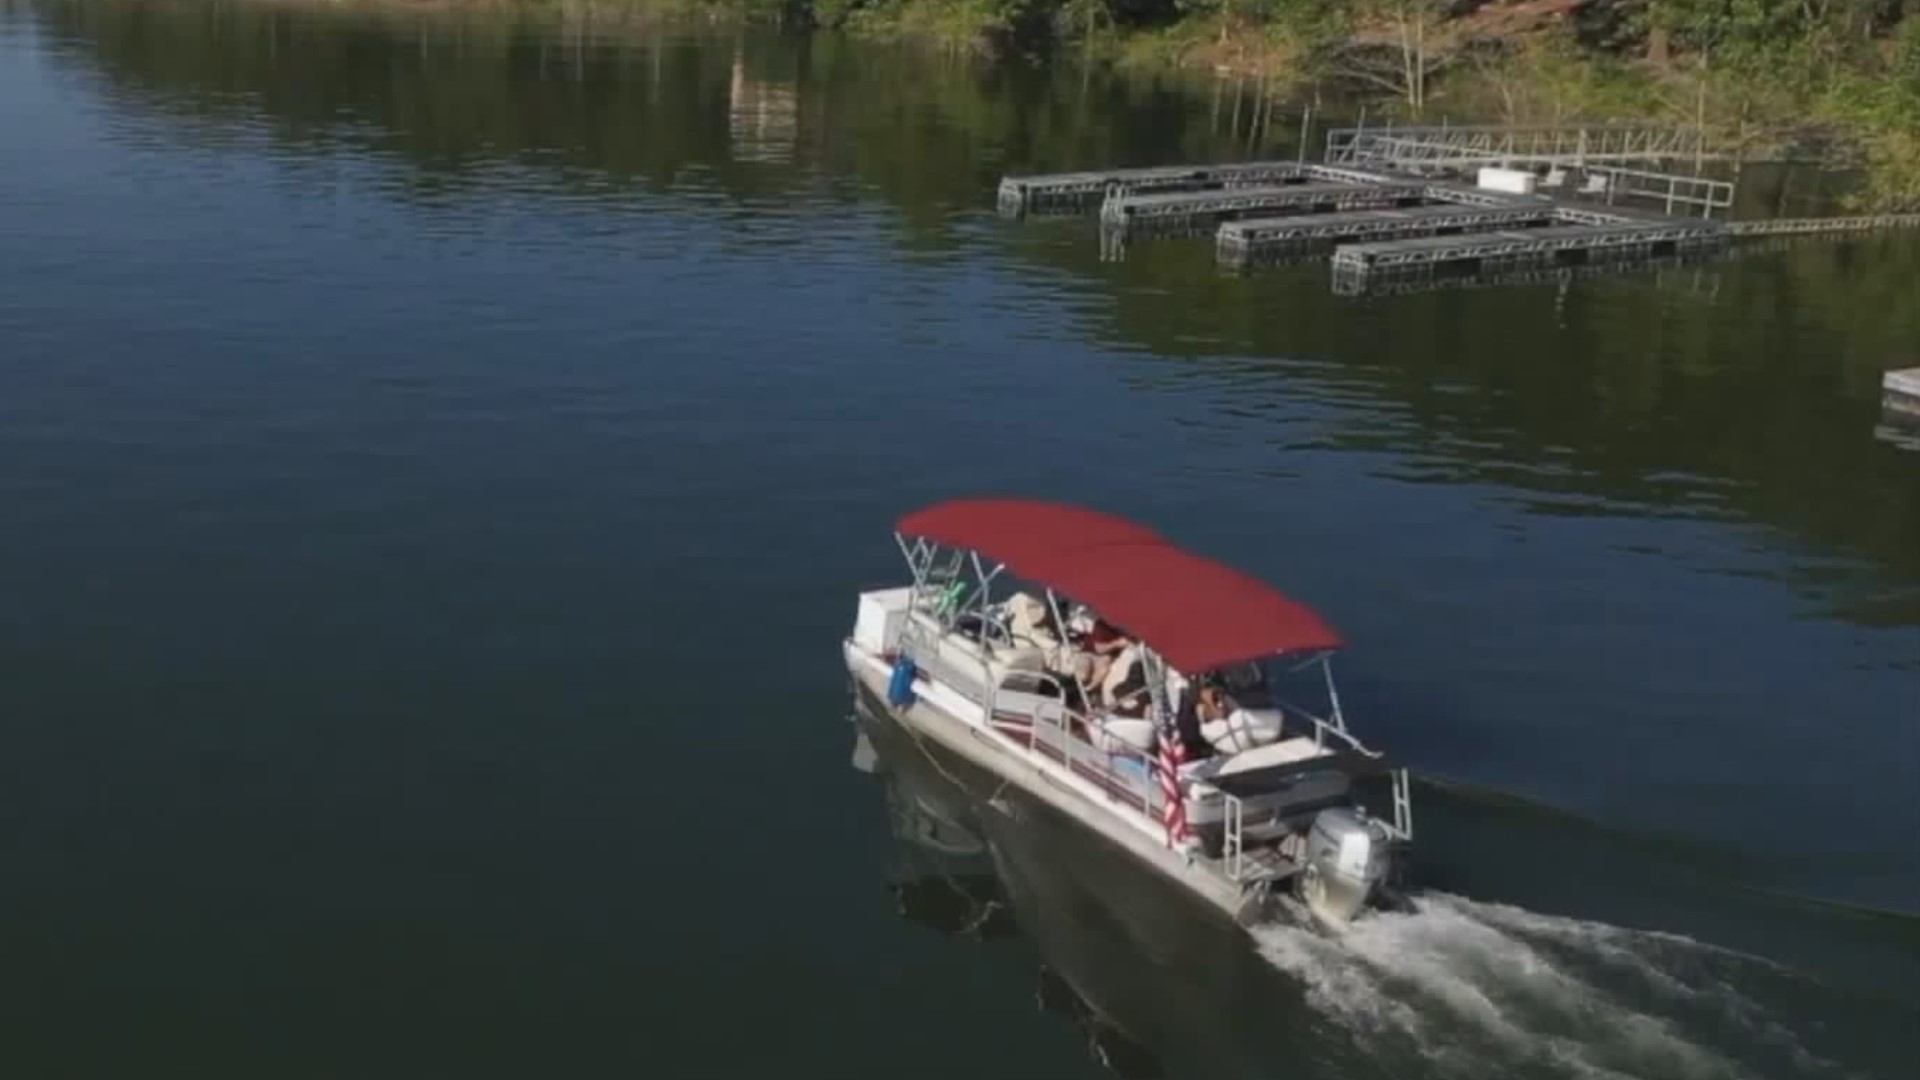 If signed into law, the bill would require boats to have warning signs posted about the dangers of open-air carbon monoxide poisoning.